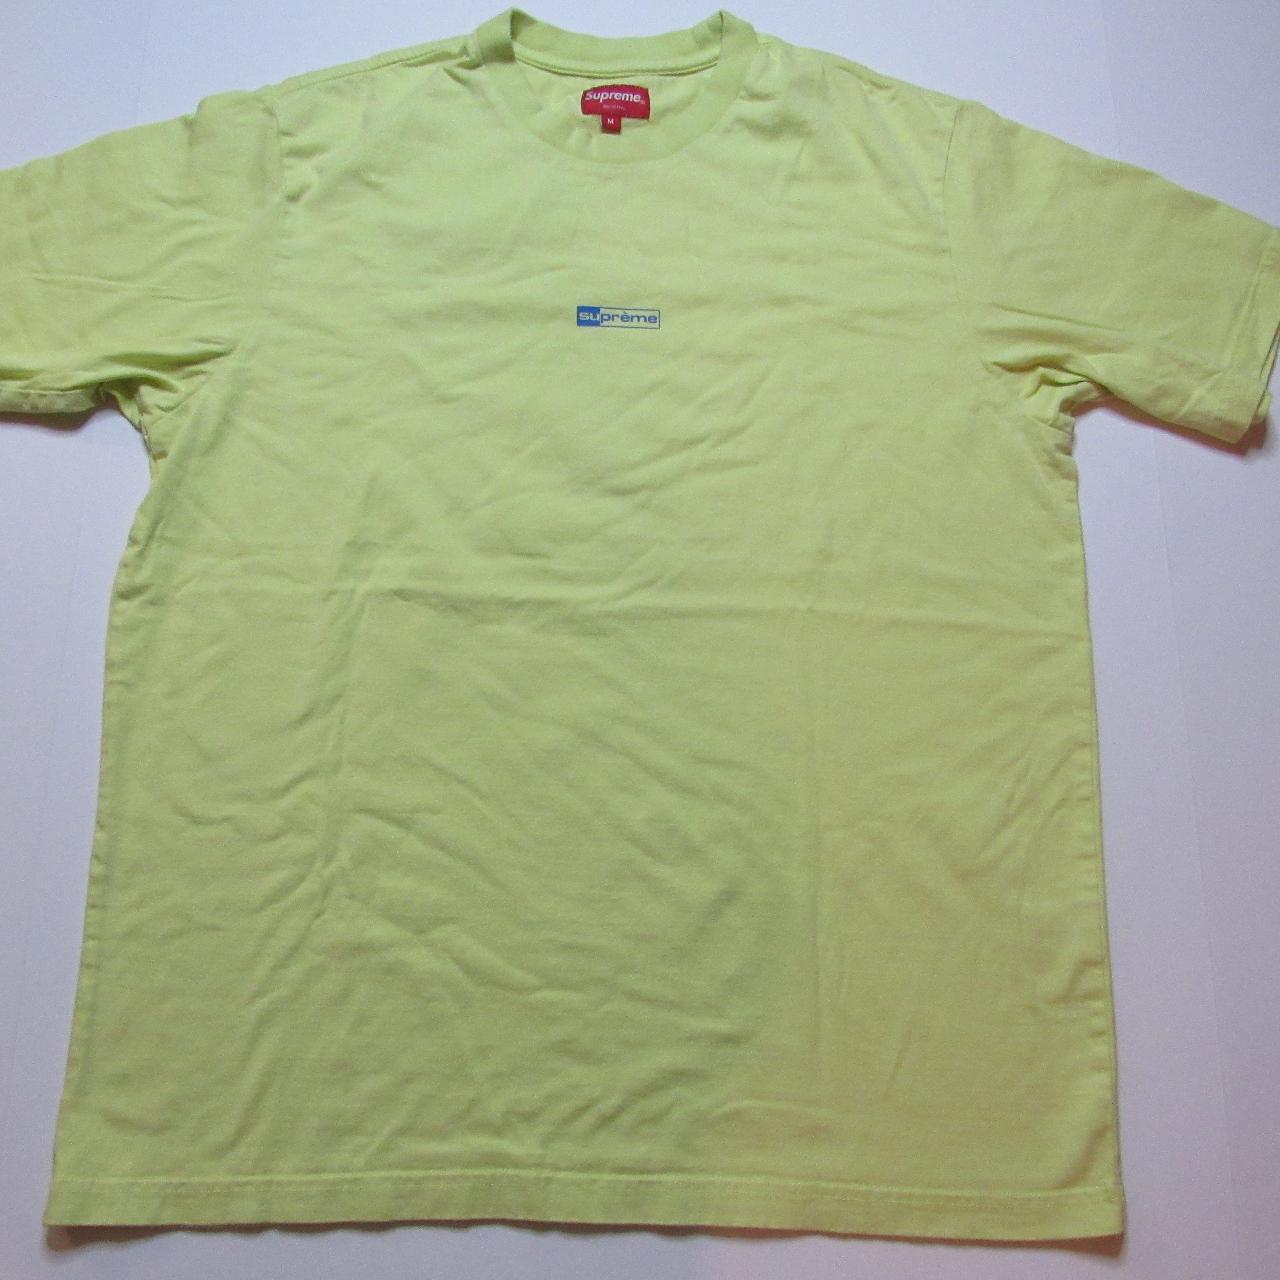 Supreme Tee yellow/lime green color with blue... - Depop